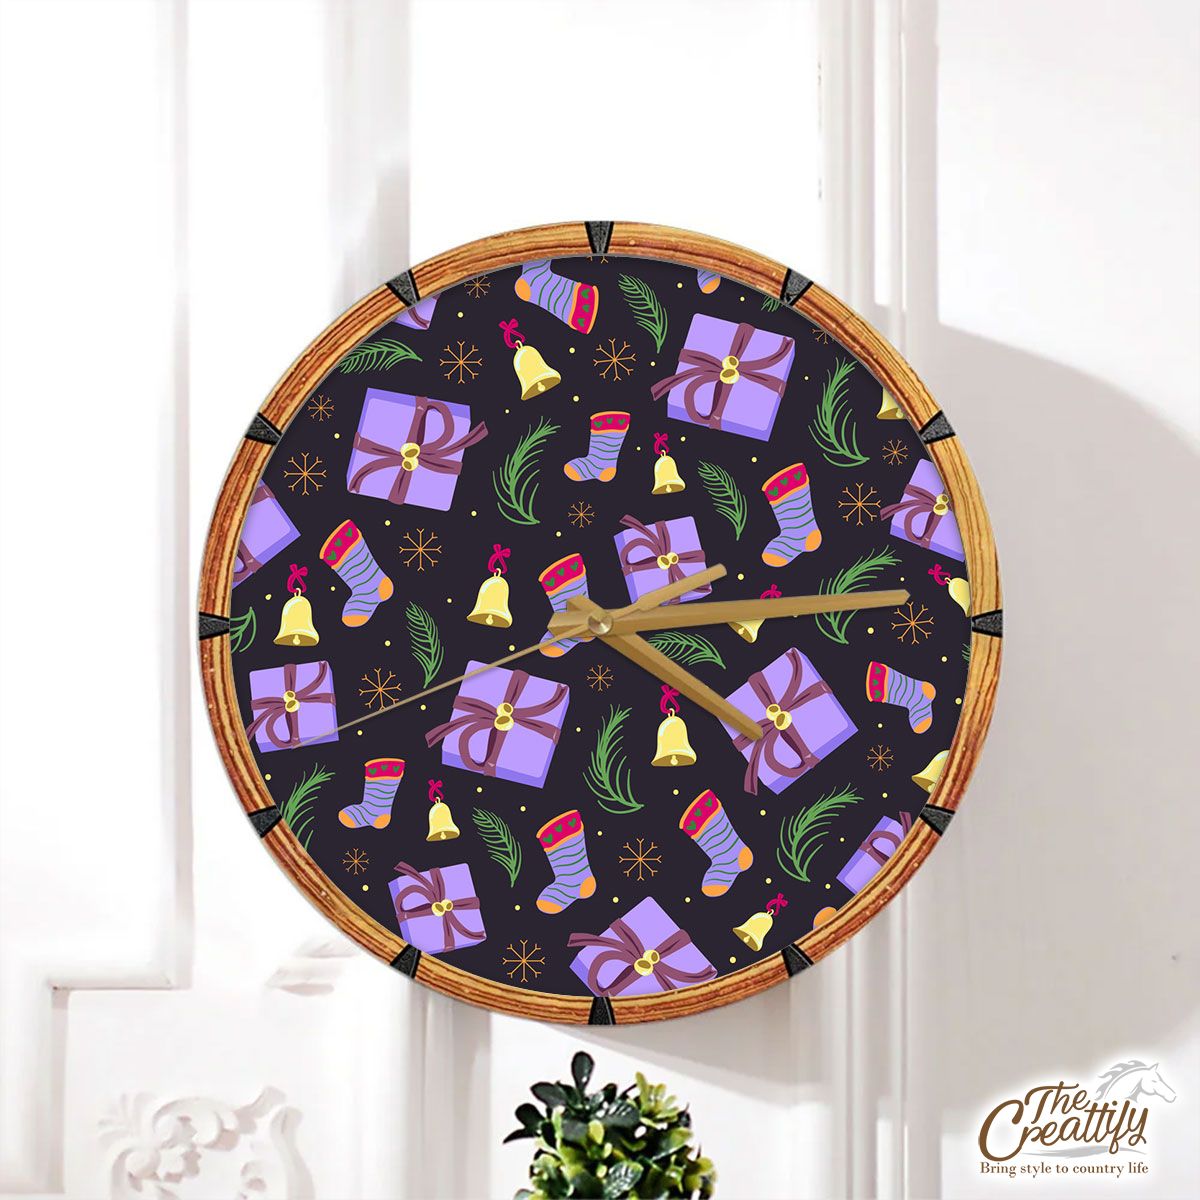 Purple Christmas Gifts And Socks With Bells On The Snowflake Dark Background Wall Clock